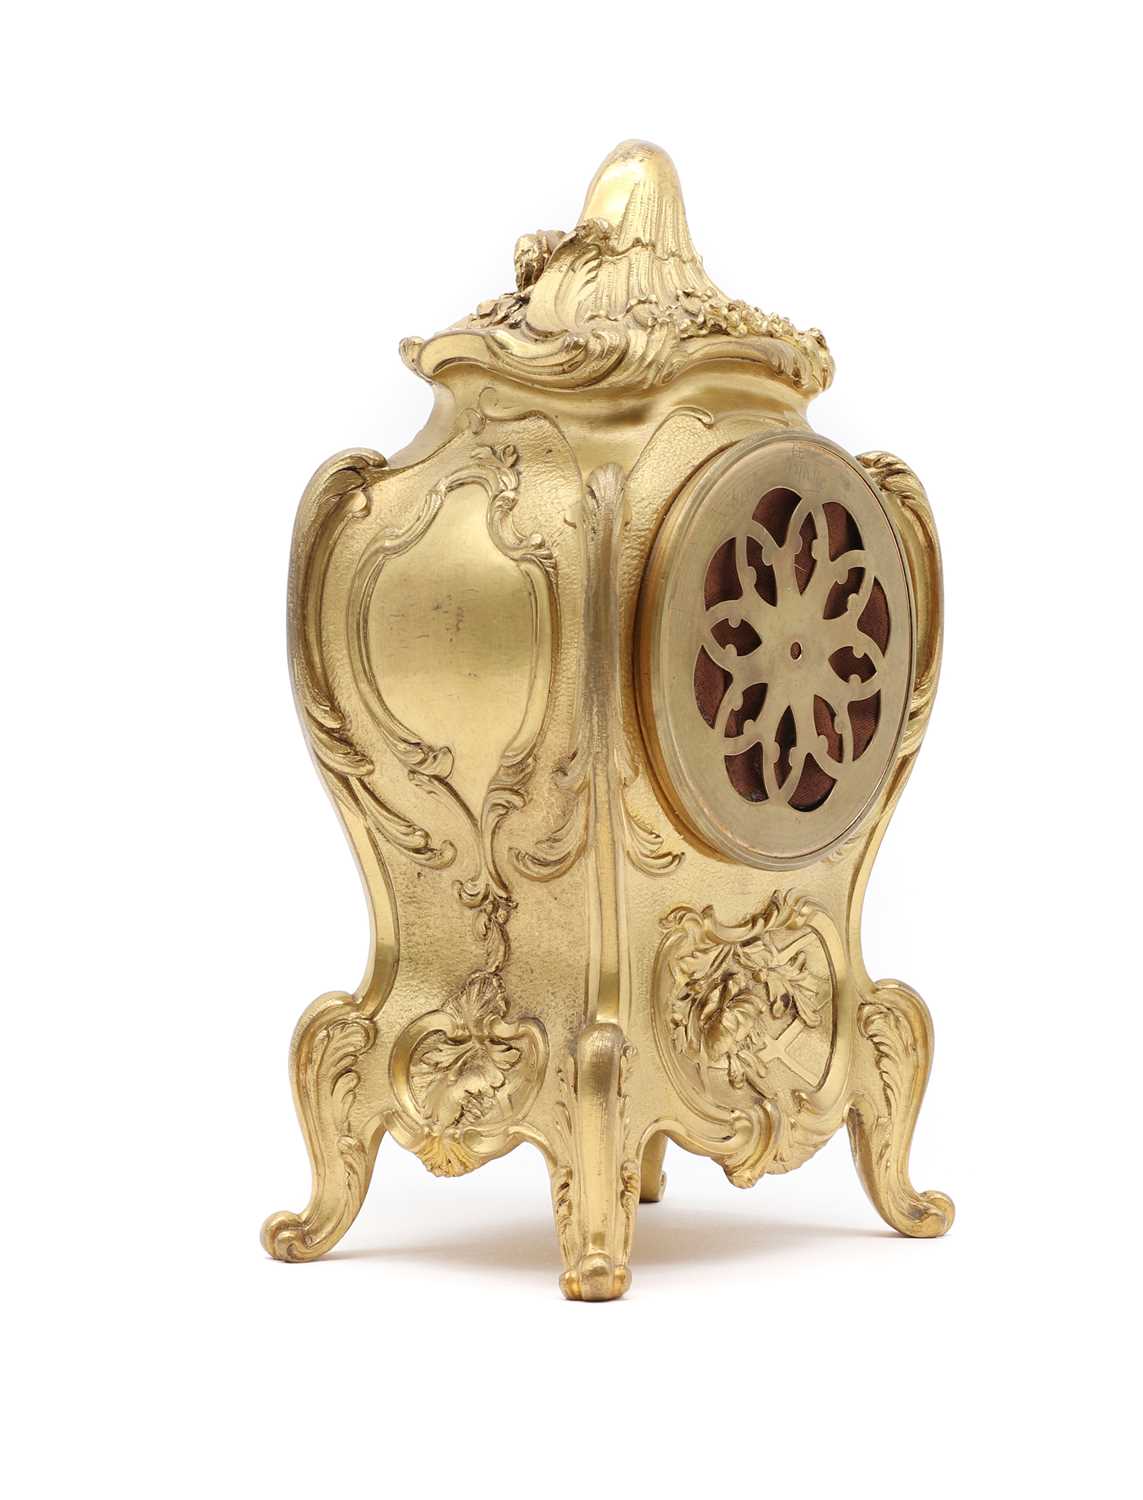 A French gilt brass mantel clock - Image 3 of 3